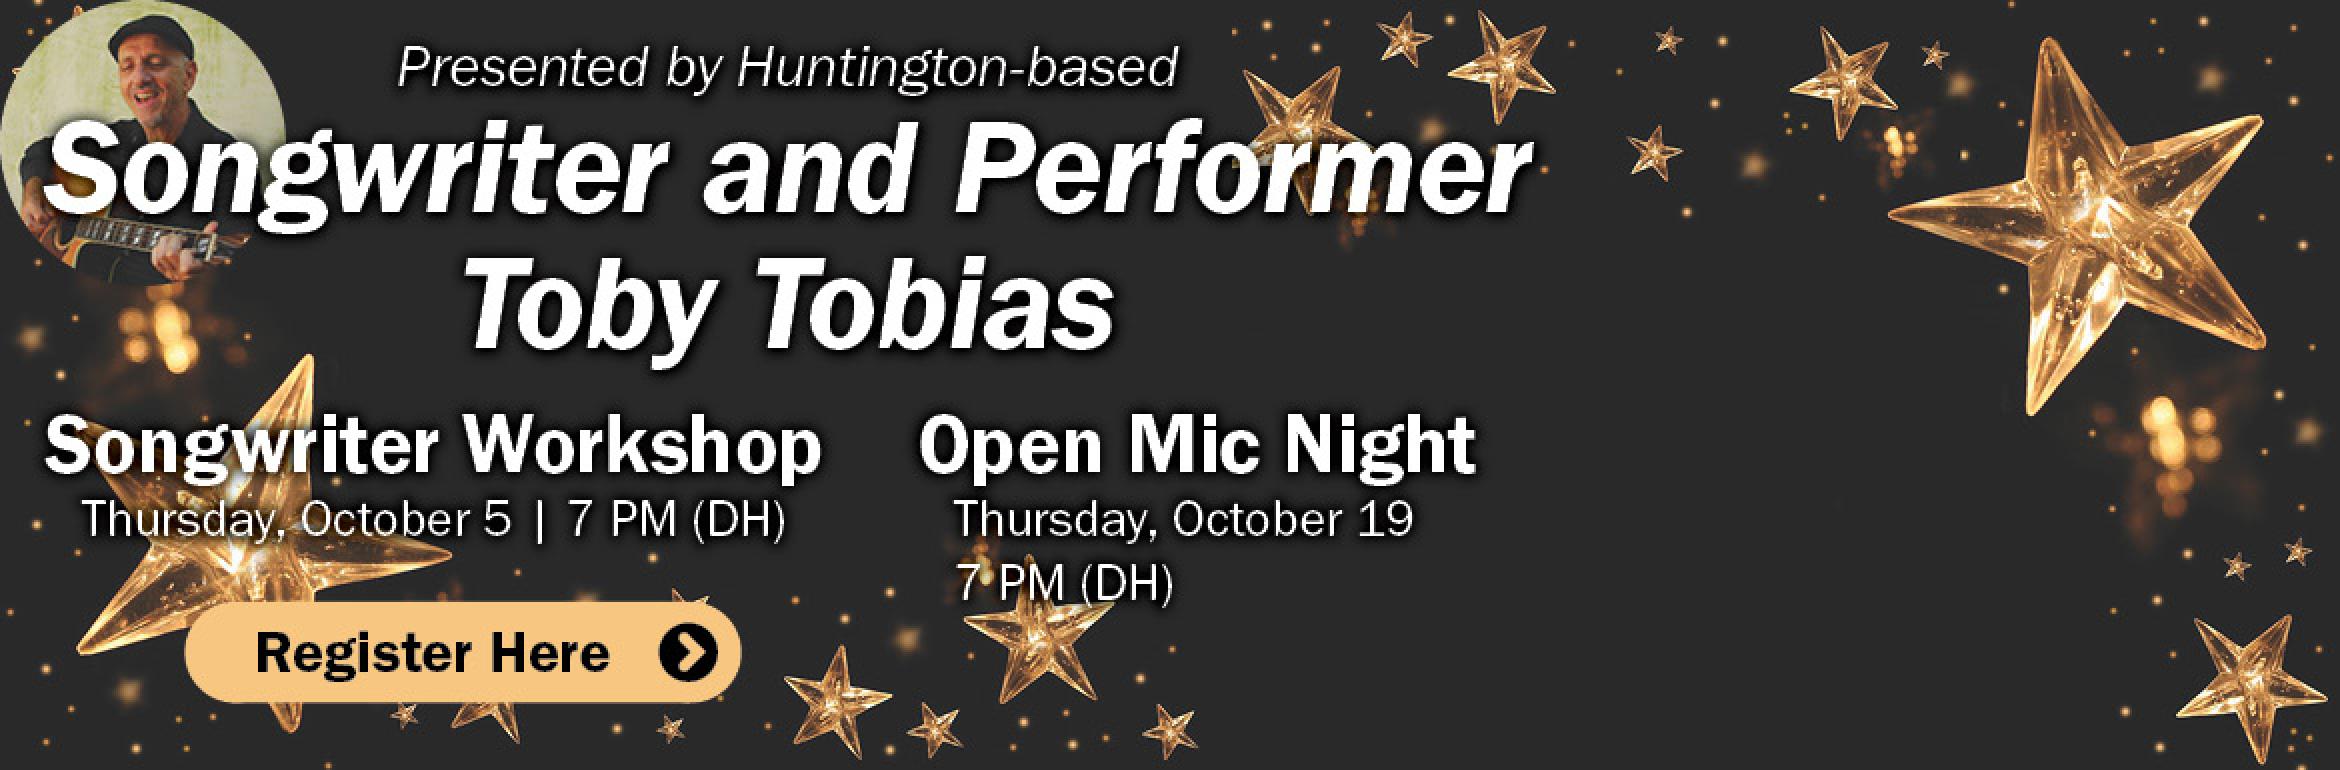 Presented by Huntington-based Songwriter and Performer Toby Tobias. Songwriter Workshop. Thursday, October 5 | 7 PM (DH). Open Mic Night. Thursday, October 19 | 7 PM (DH).